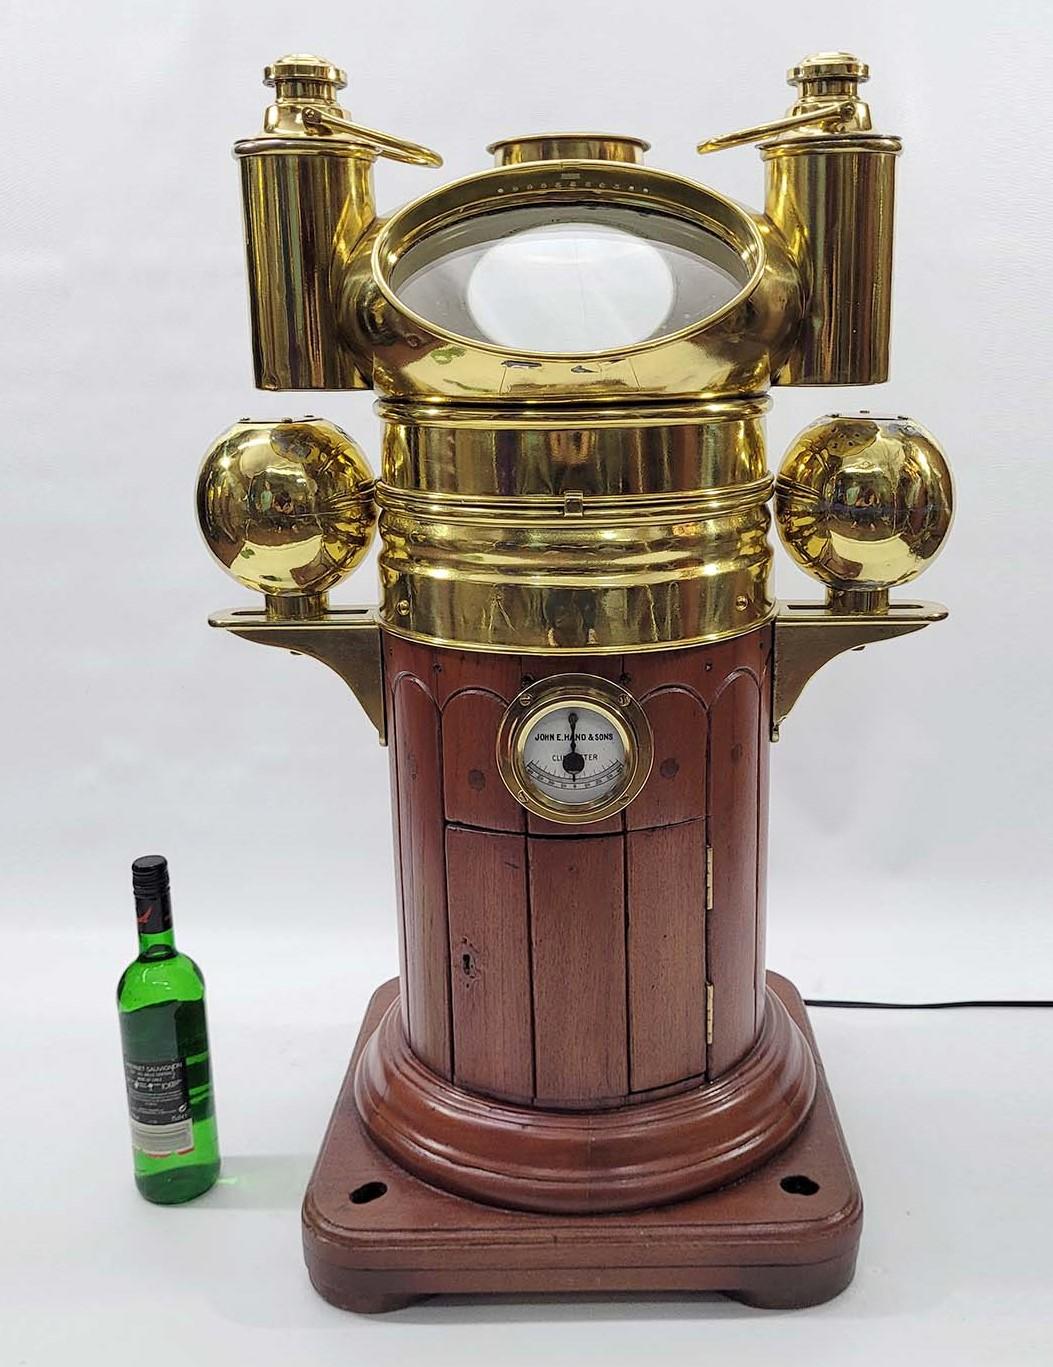 High quality nineteenth century ships binnacle from John Hand and Sons. Mushroom top with oil burners. Brass covers on the iron compensating balls. Brass brackets hold the balls. Brass clinometer from John E Hand and Sons is fitted to the base with